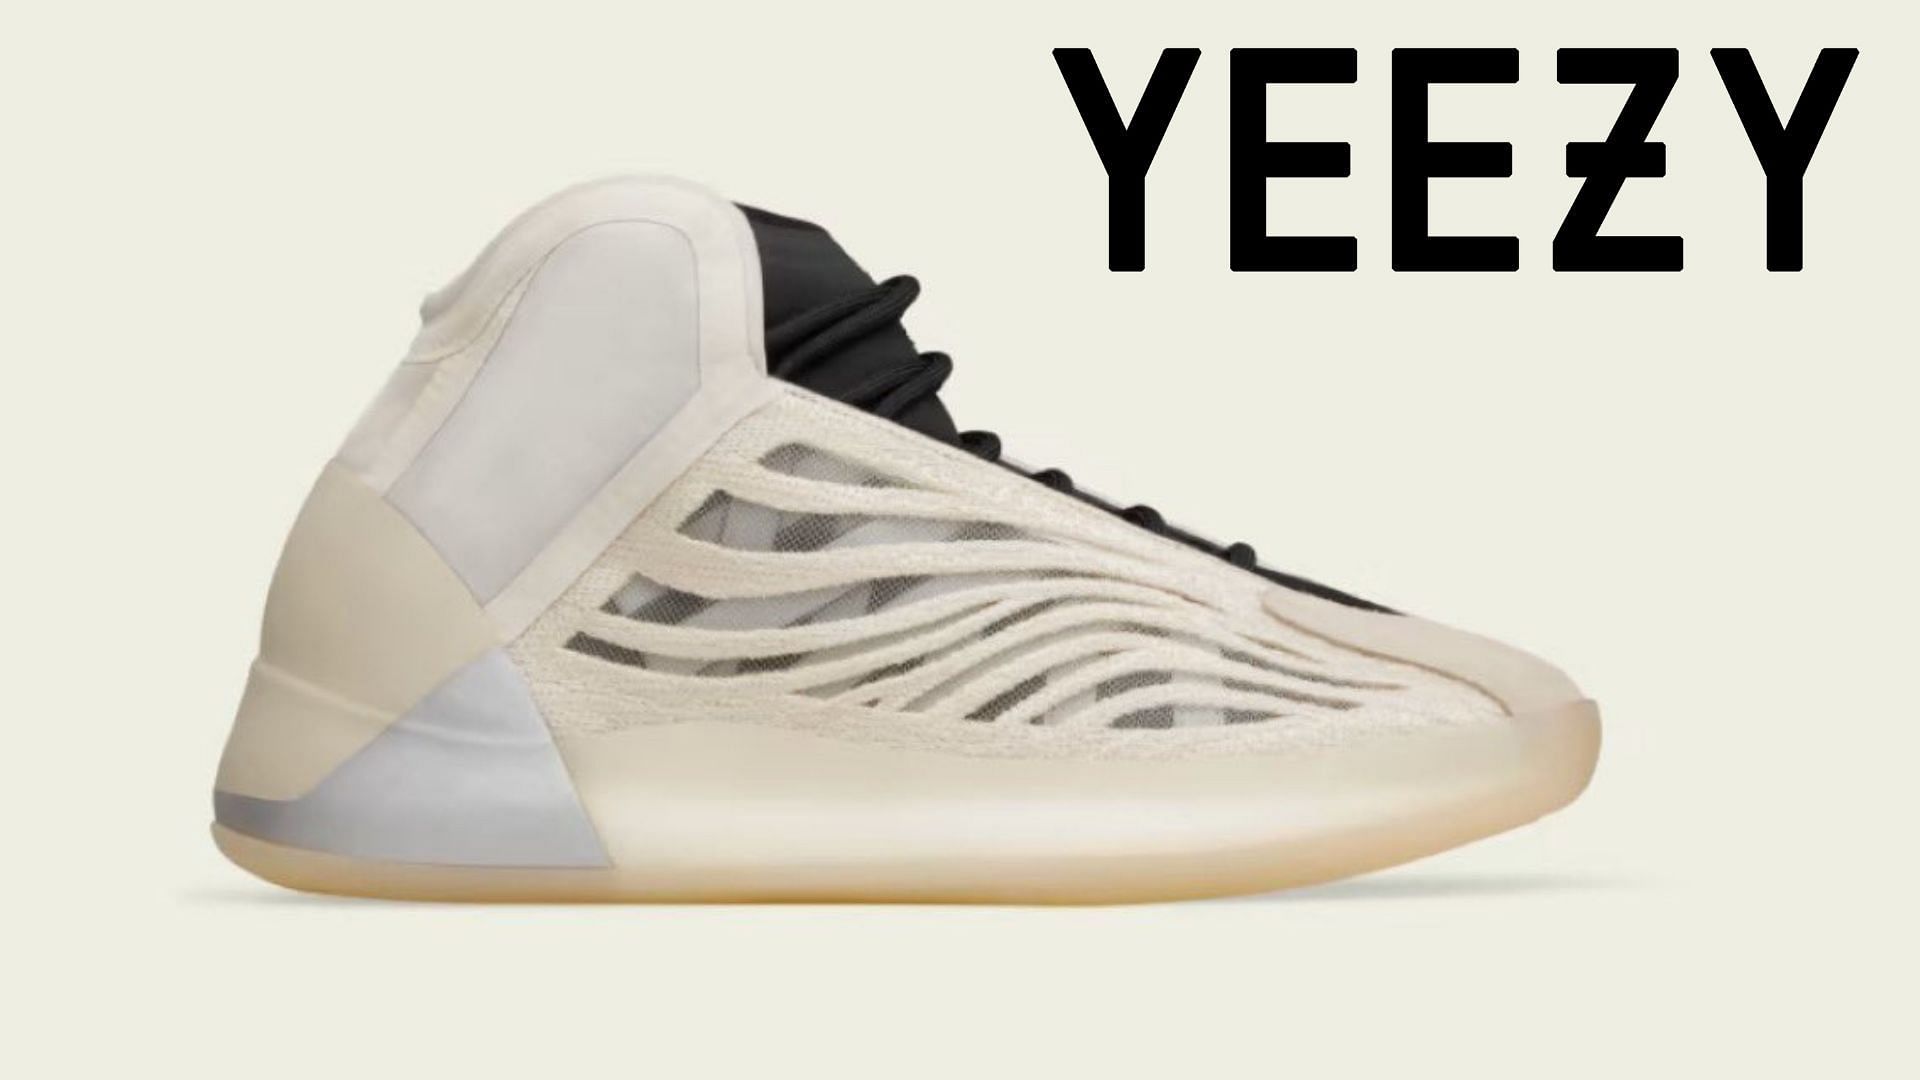 Yeezy QNTM: Adidas Yeezy QNTM “Cream” shoes: Where to price, and more details explored